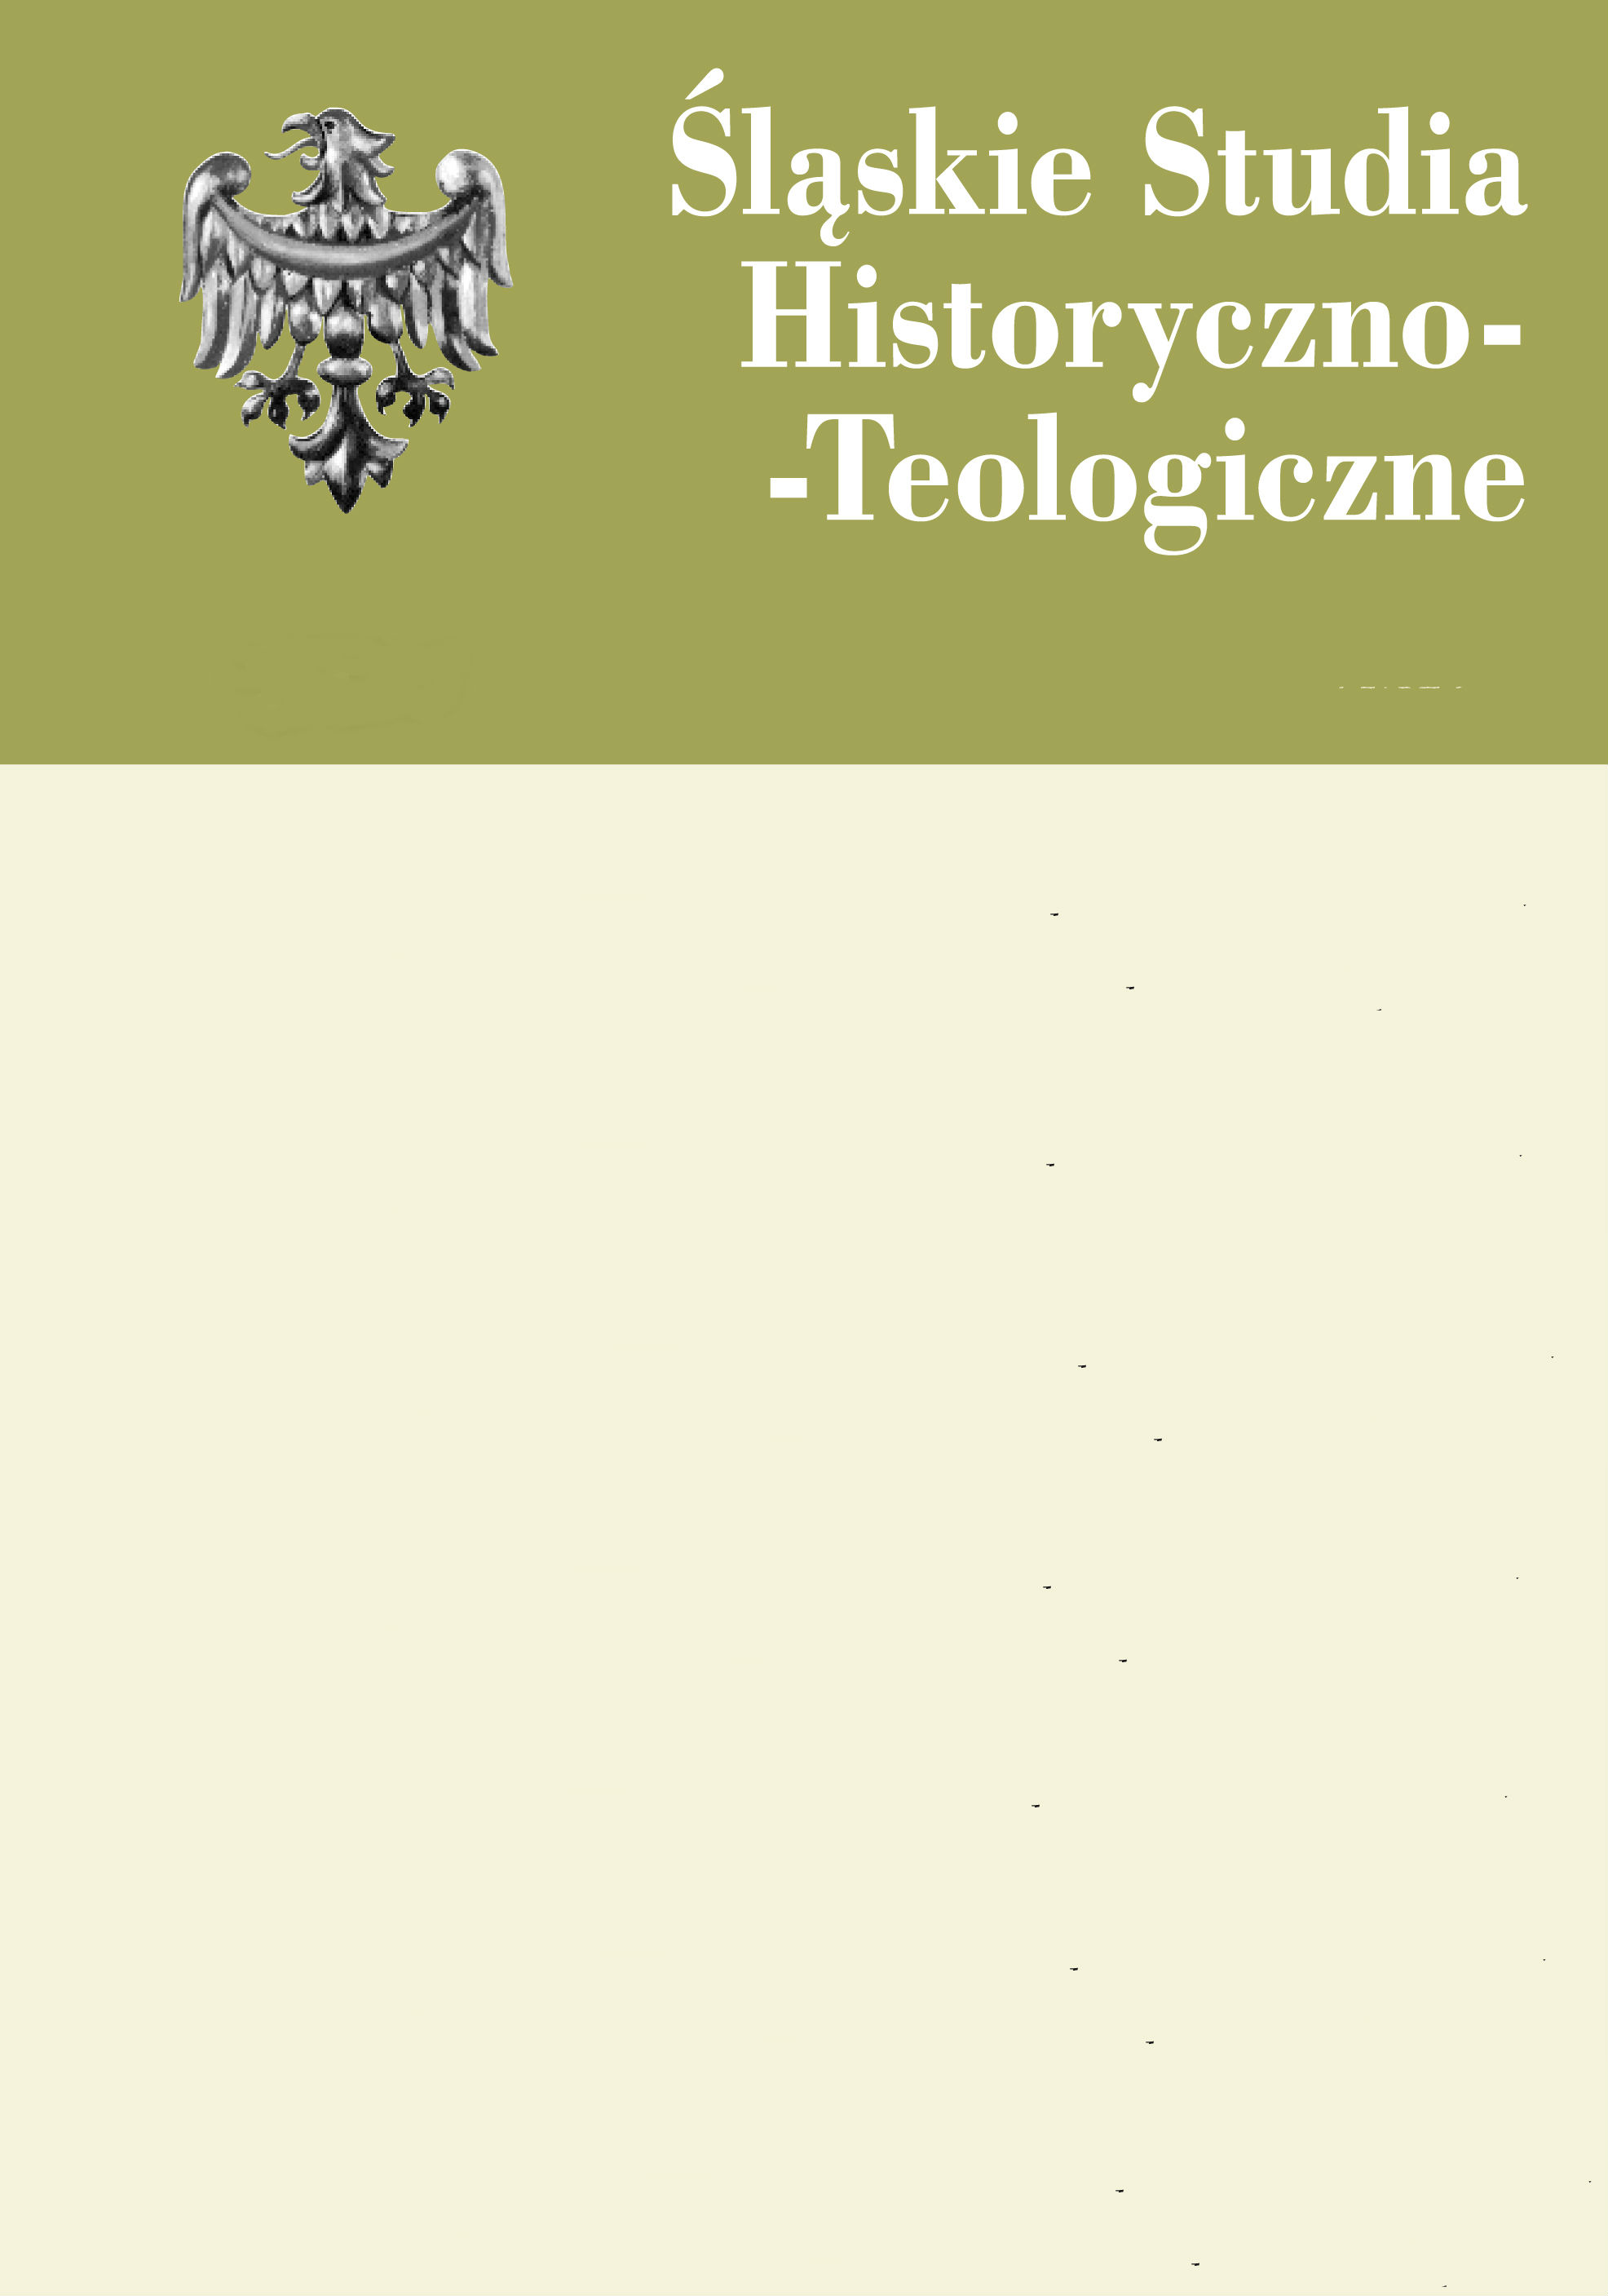 Martyrology of Polish Clergy from Zaolzie during World War II Cover Image